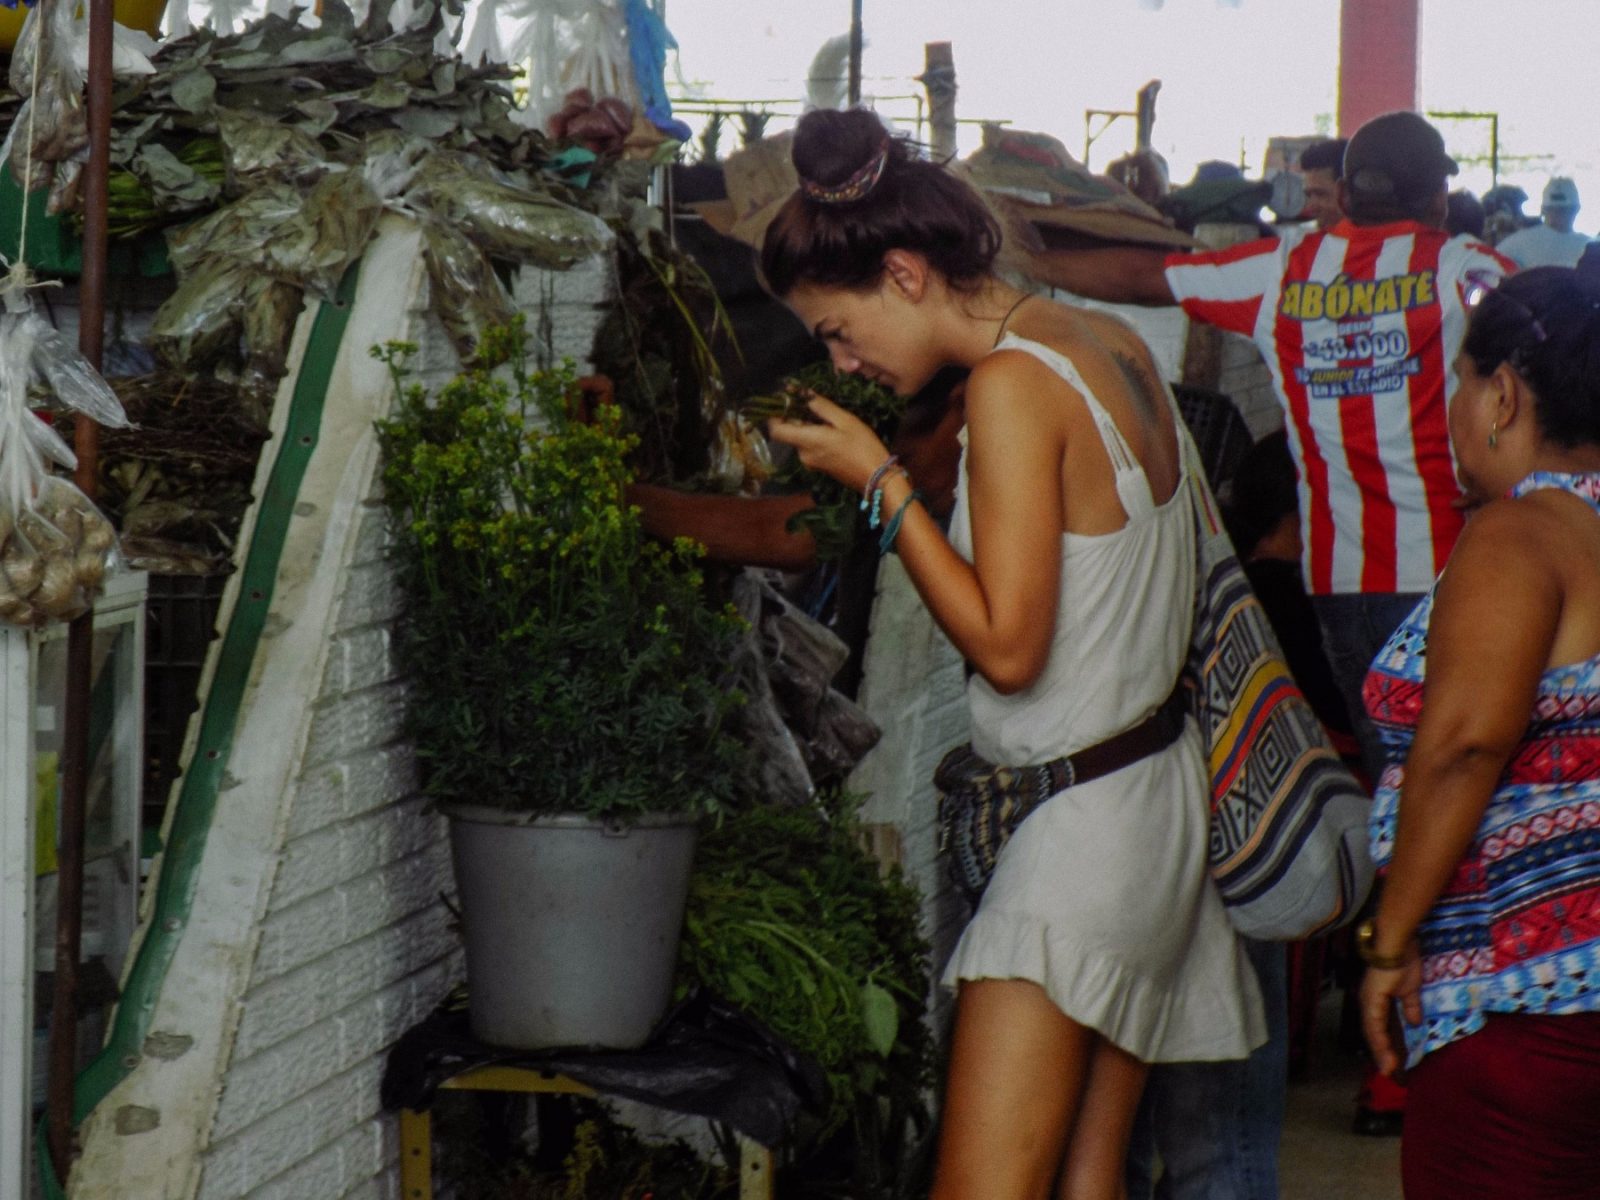 A girl smelling herbs at the market